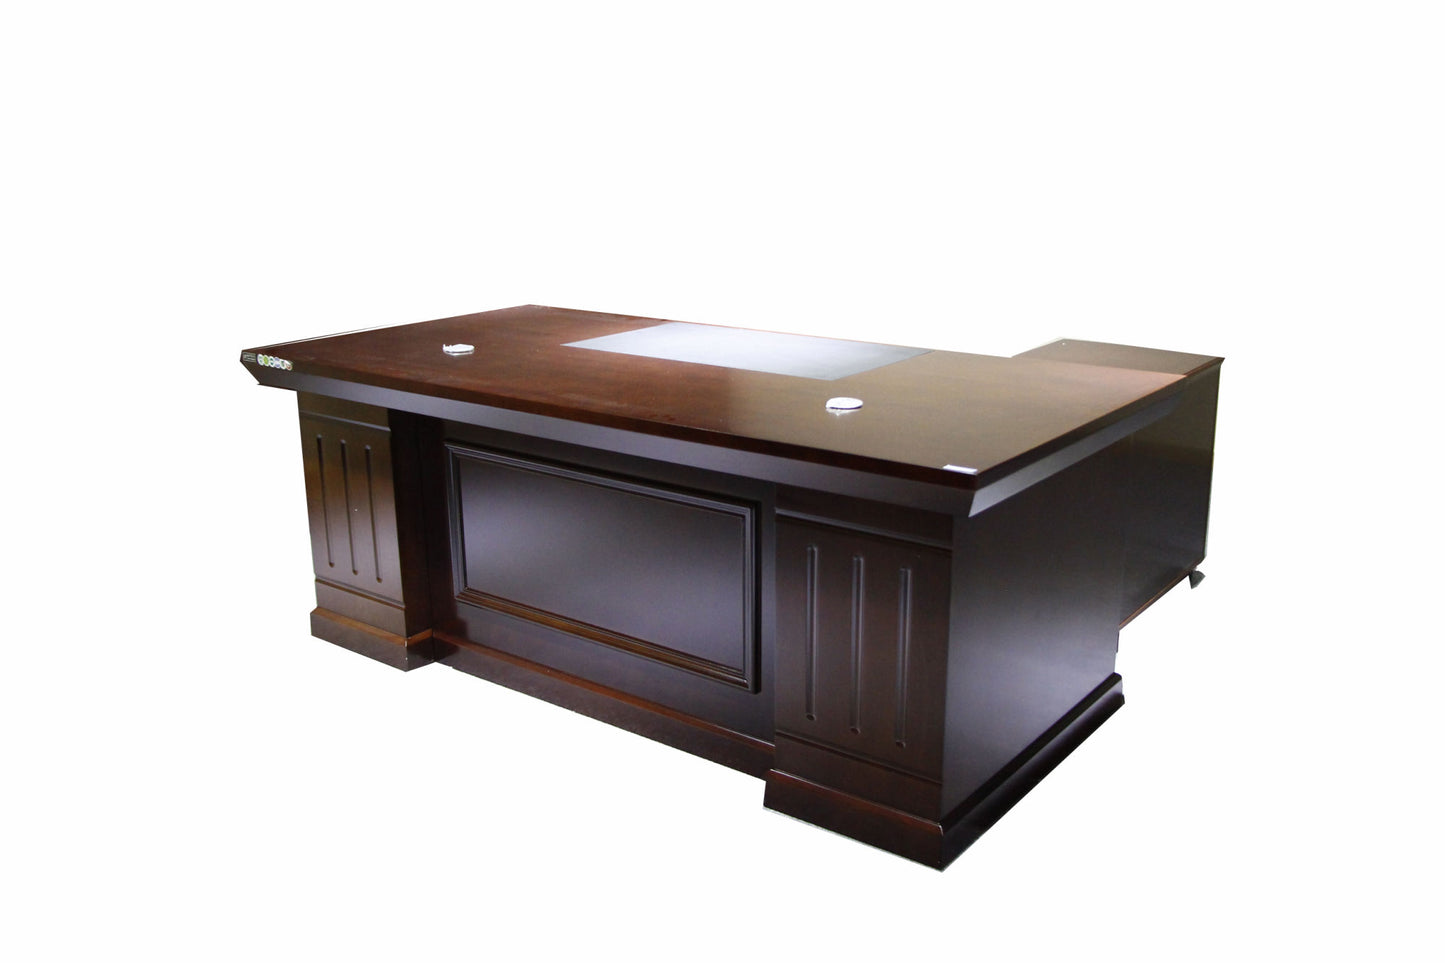 Classic luxury wooden office furniture modern antique office furniture desk paint office desk